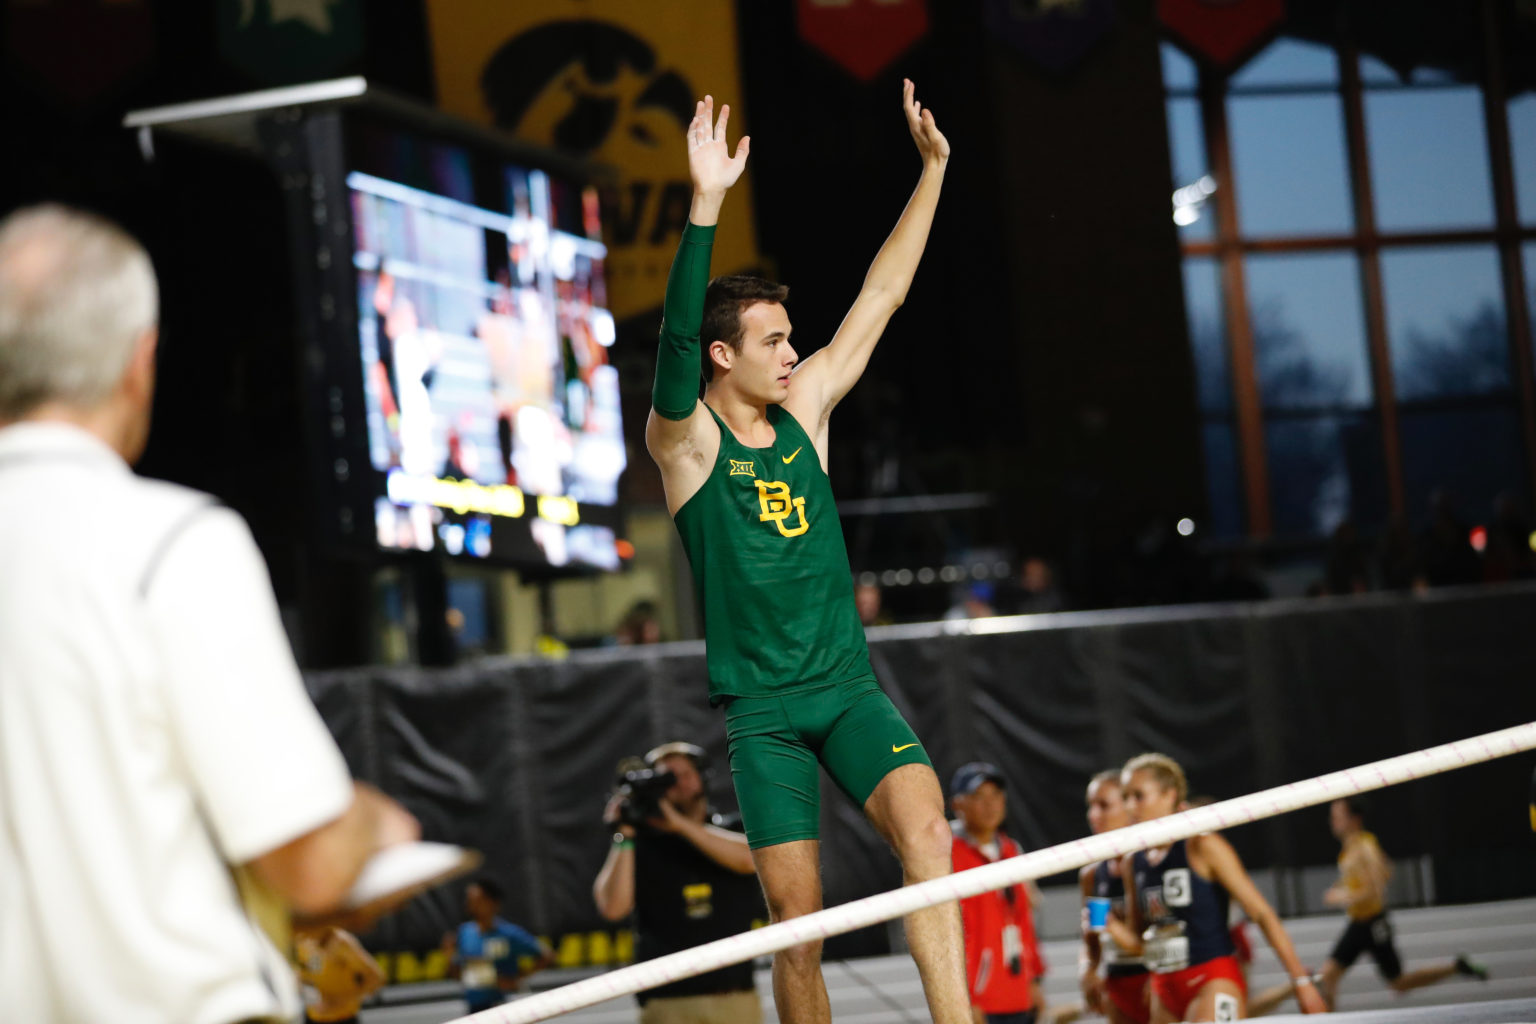 Baylor track and field takes off on the right foot, continuing season